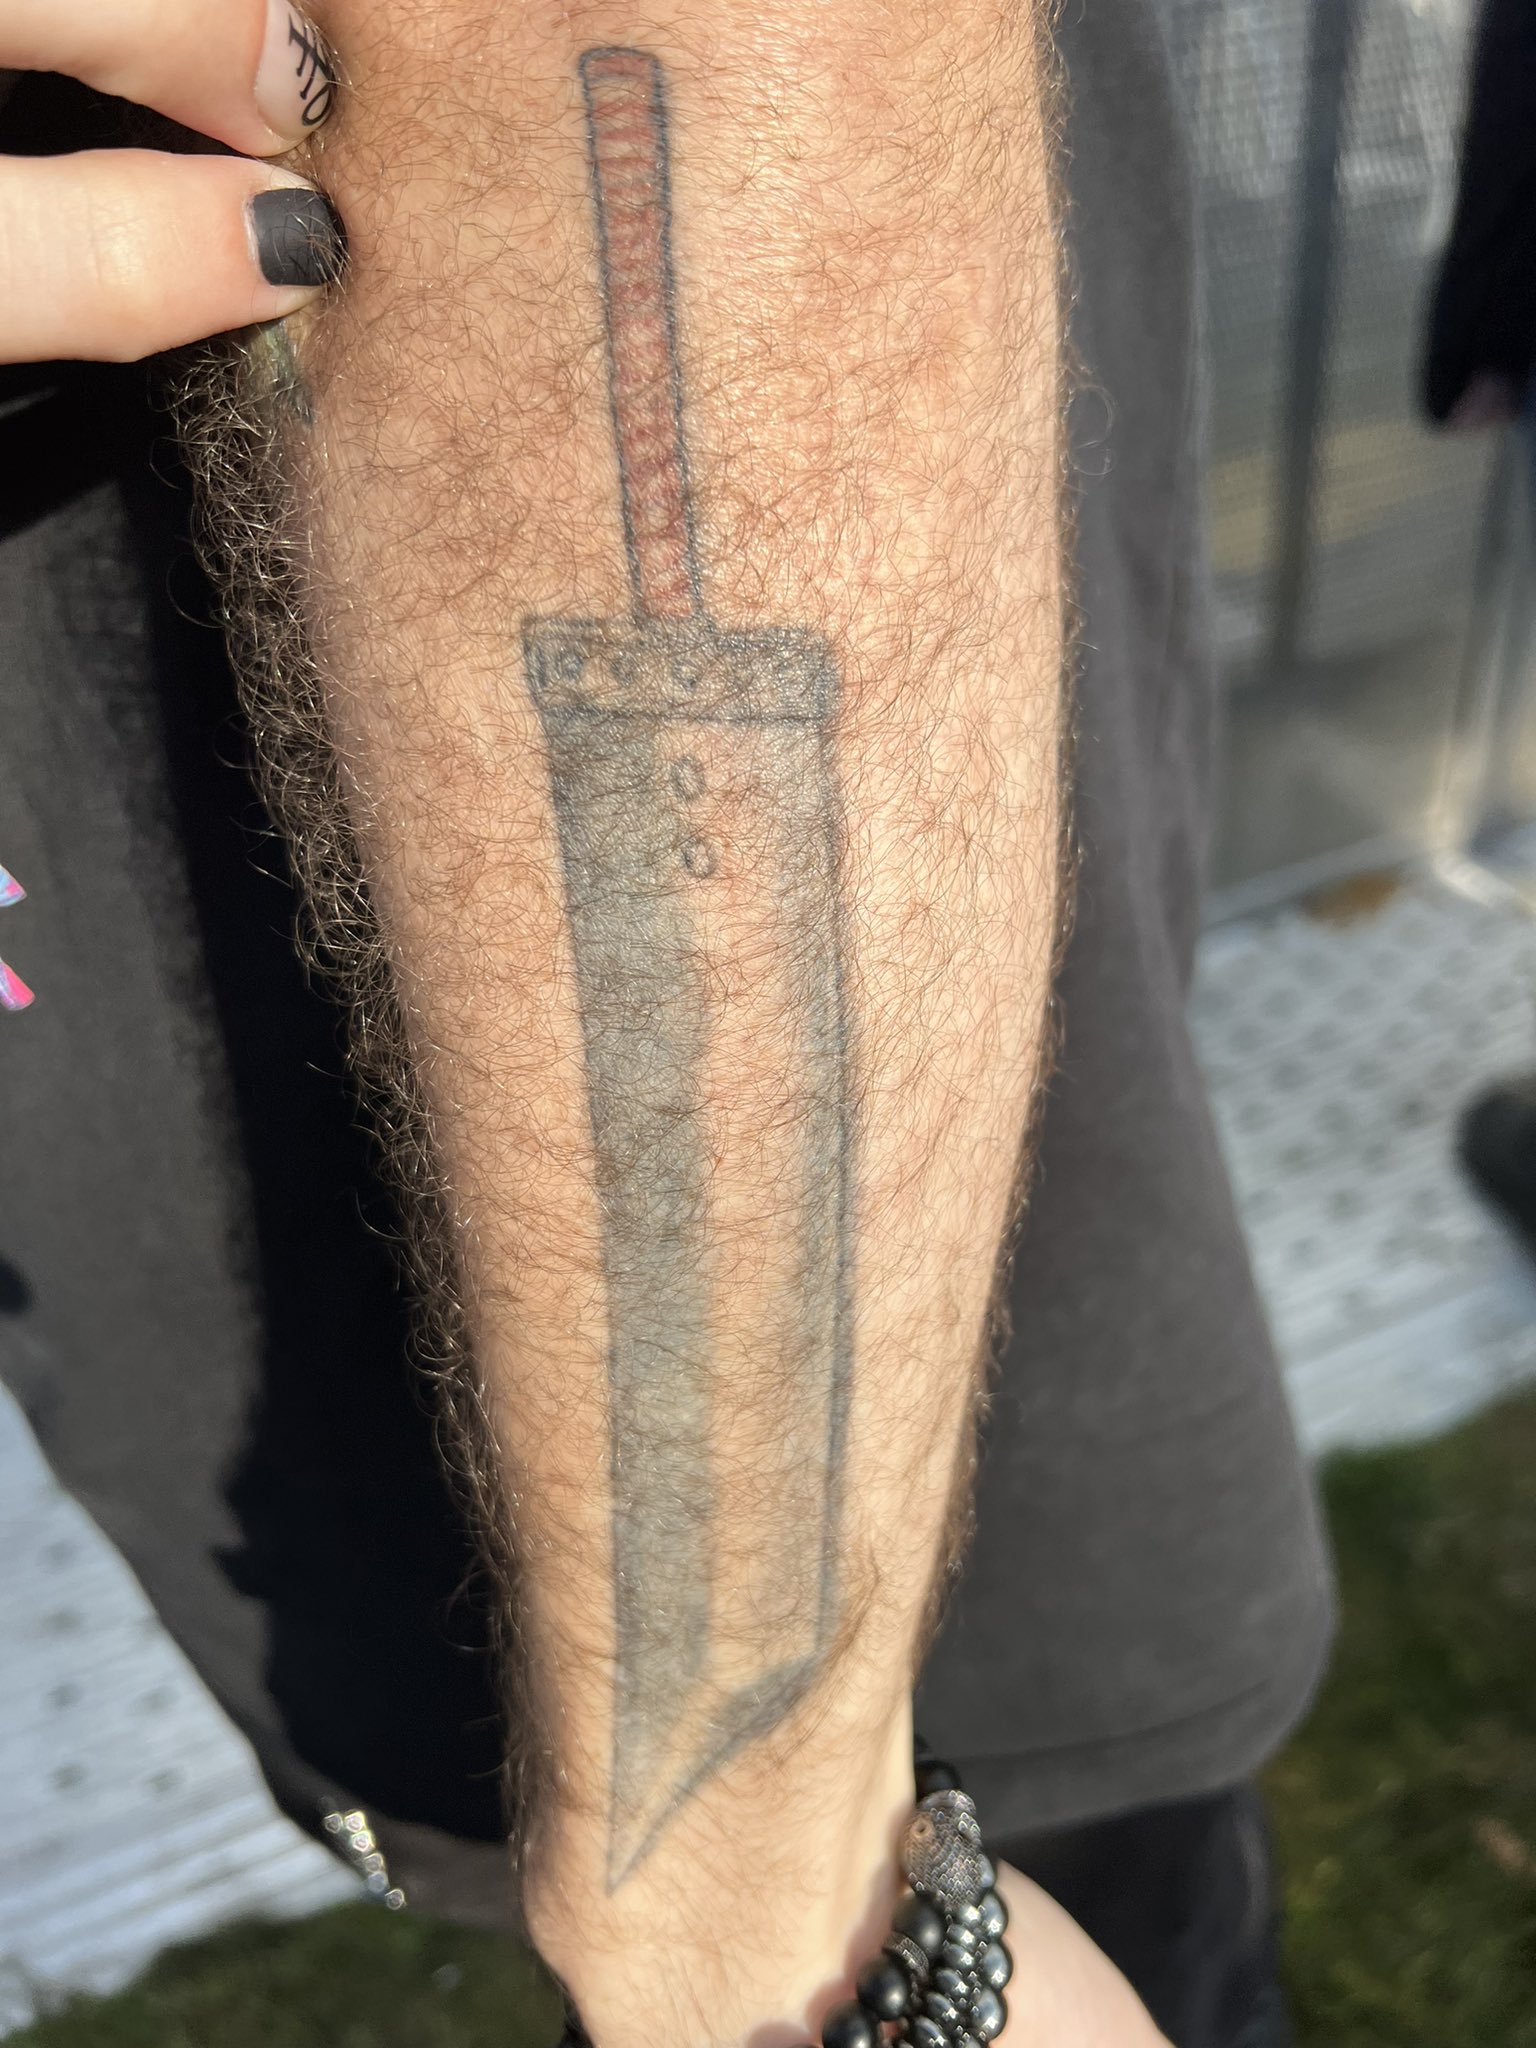 Tattoo tagged with: sword, small, jin, tiny, ifttt, little, blackwork,  forearm, weapon, illustrative | inked-app.com